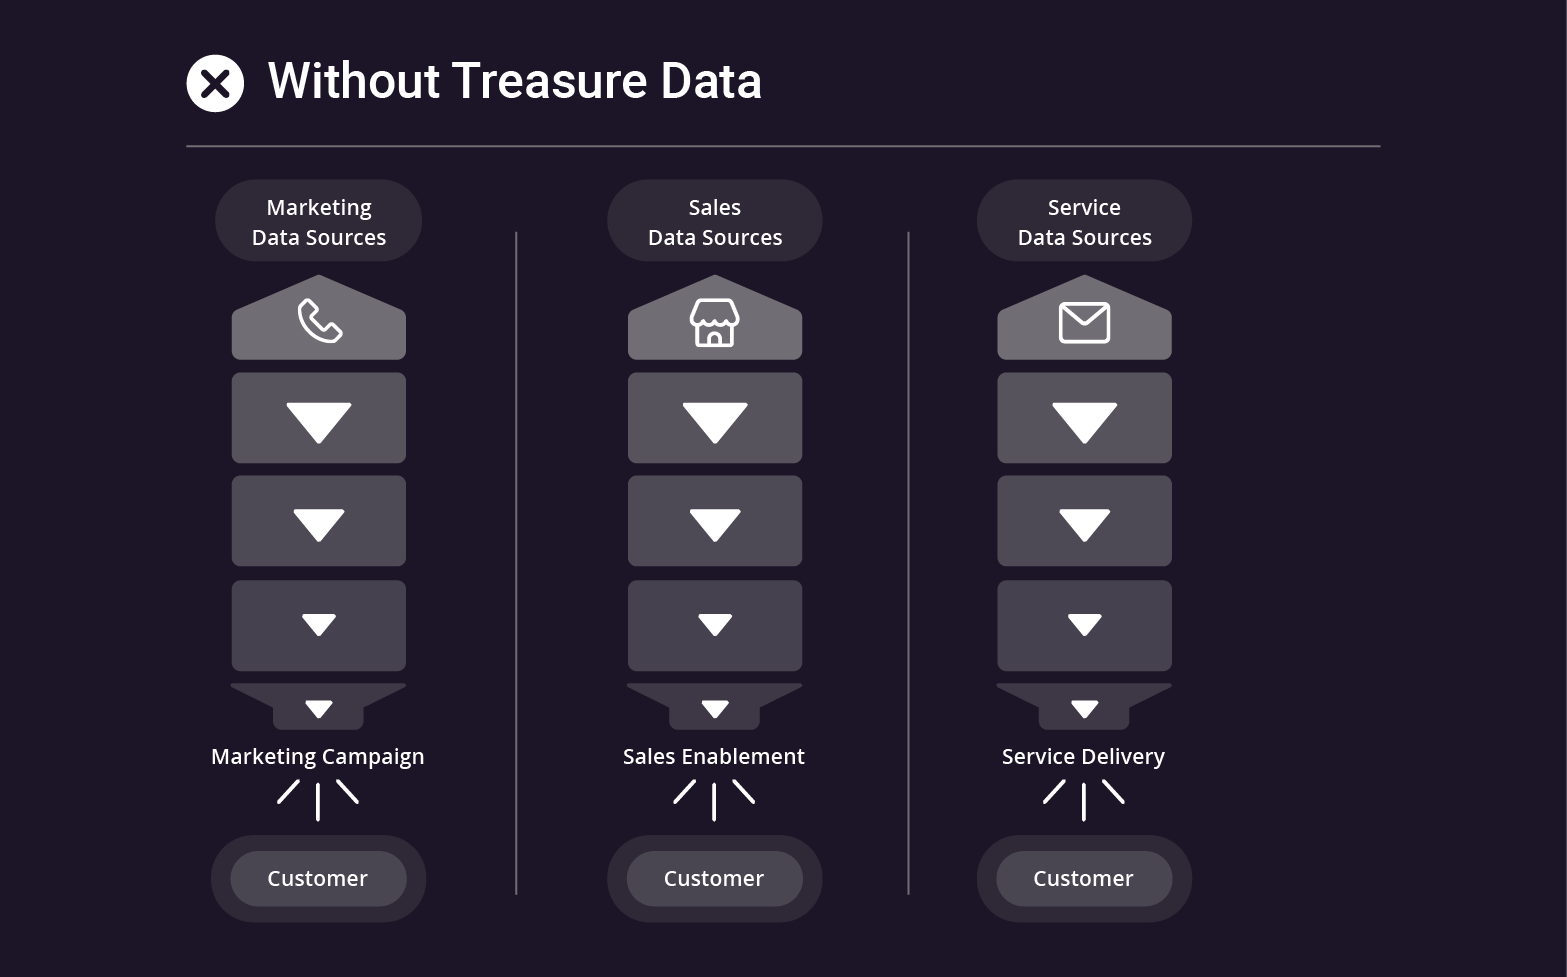 Without Treasure Data